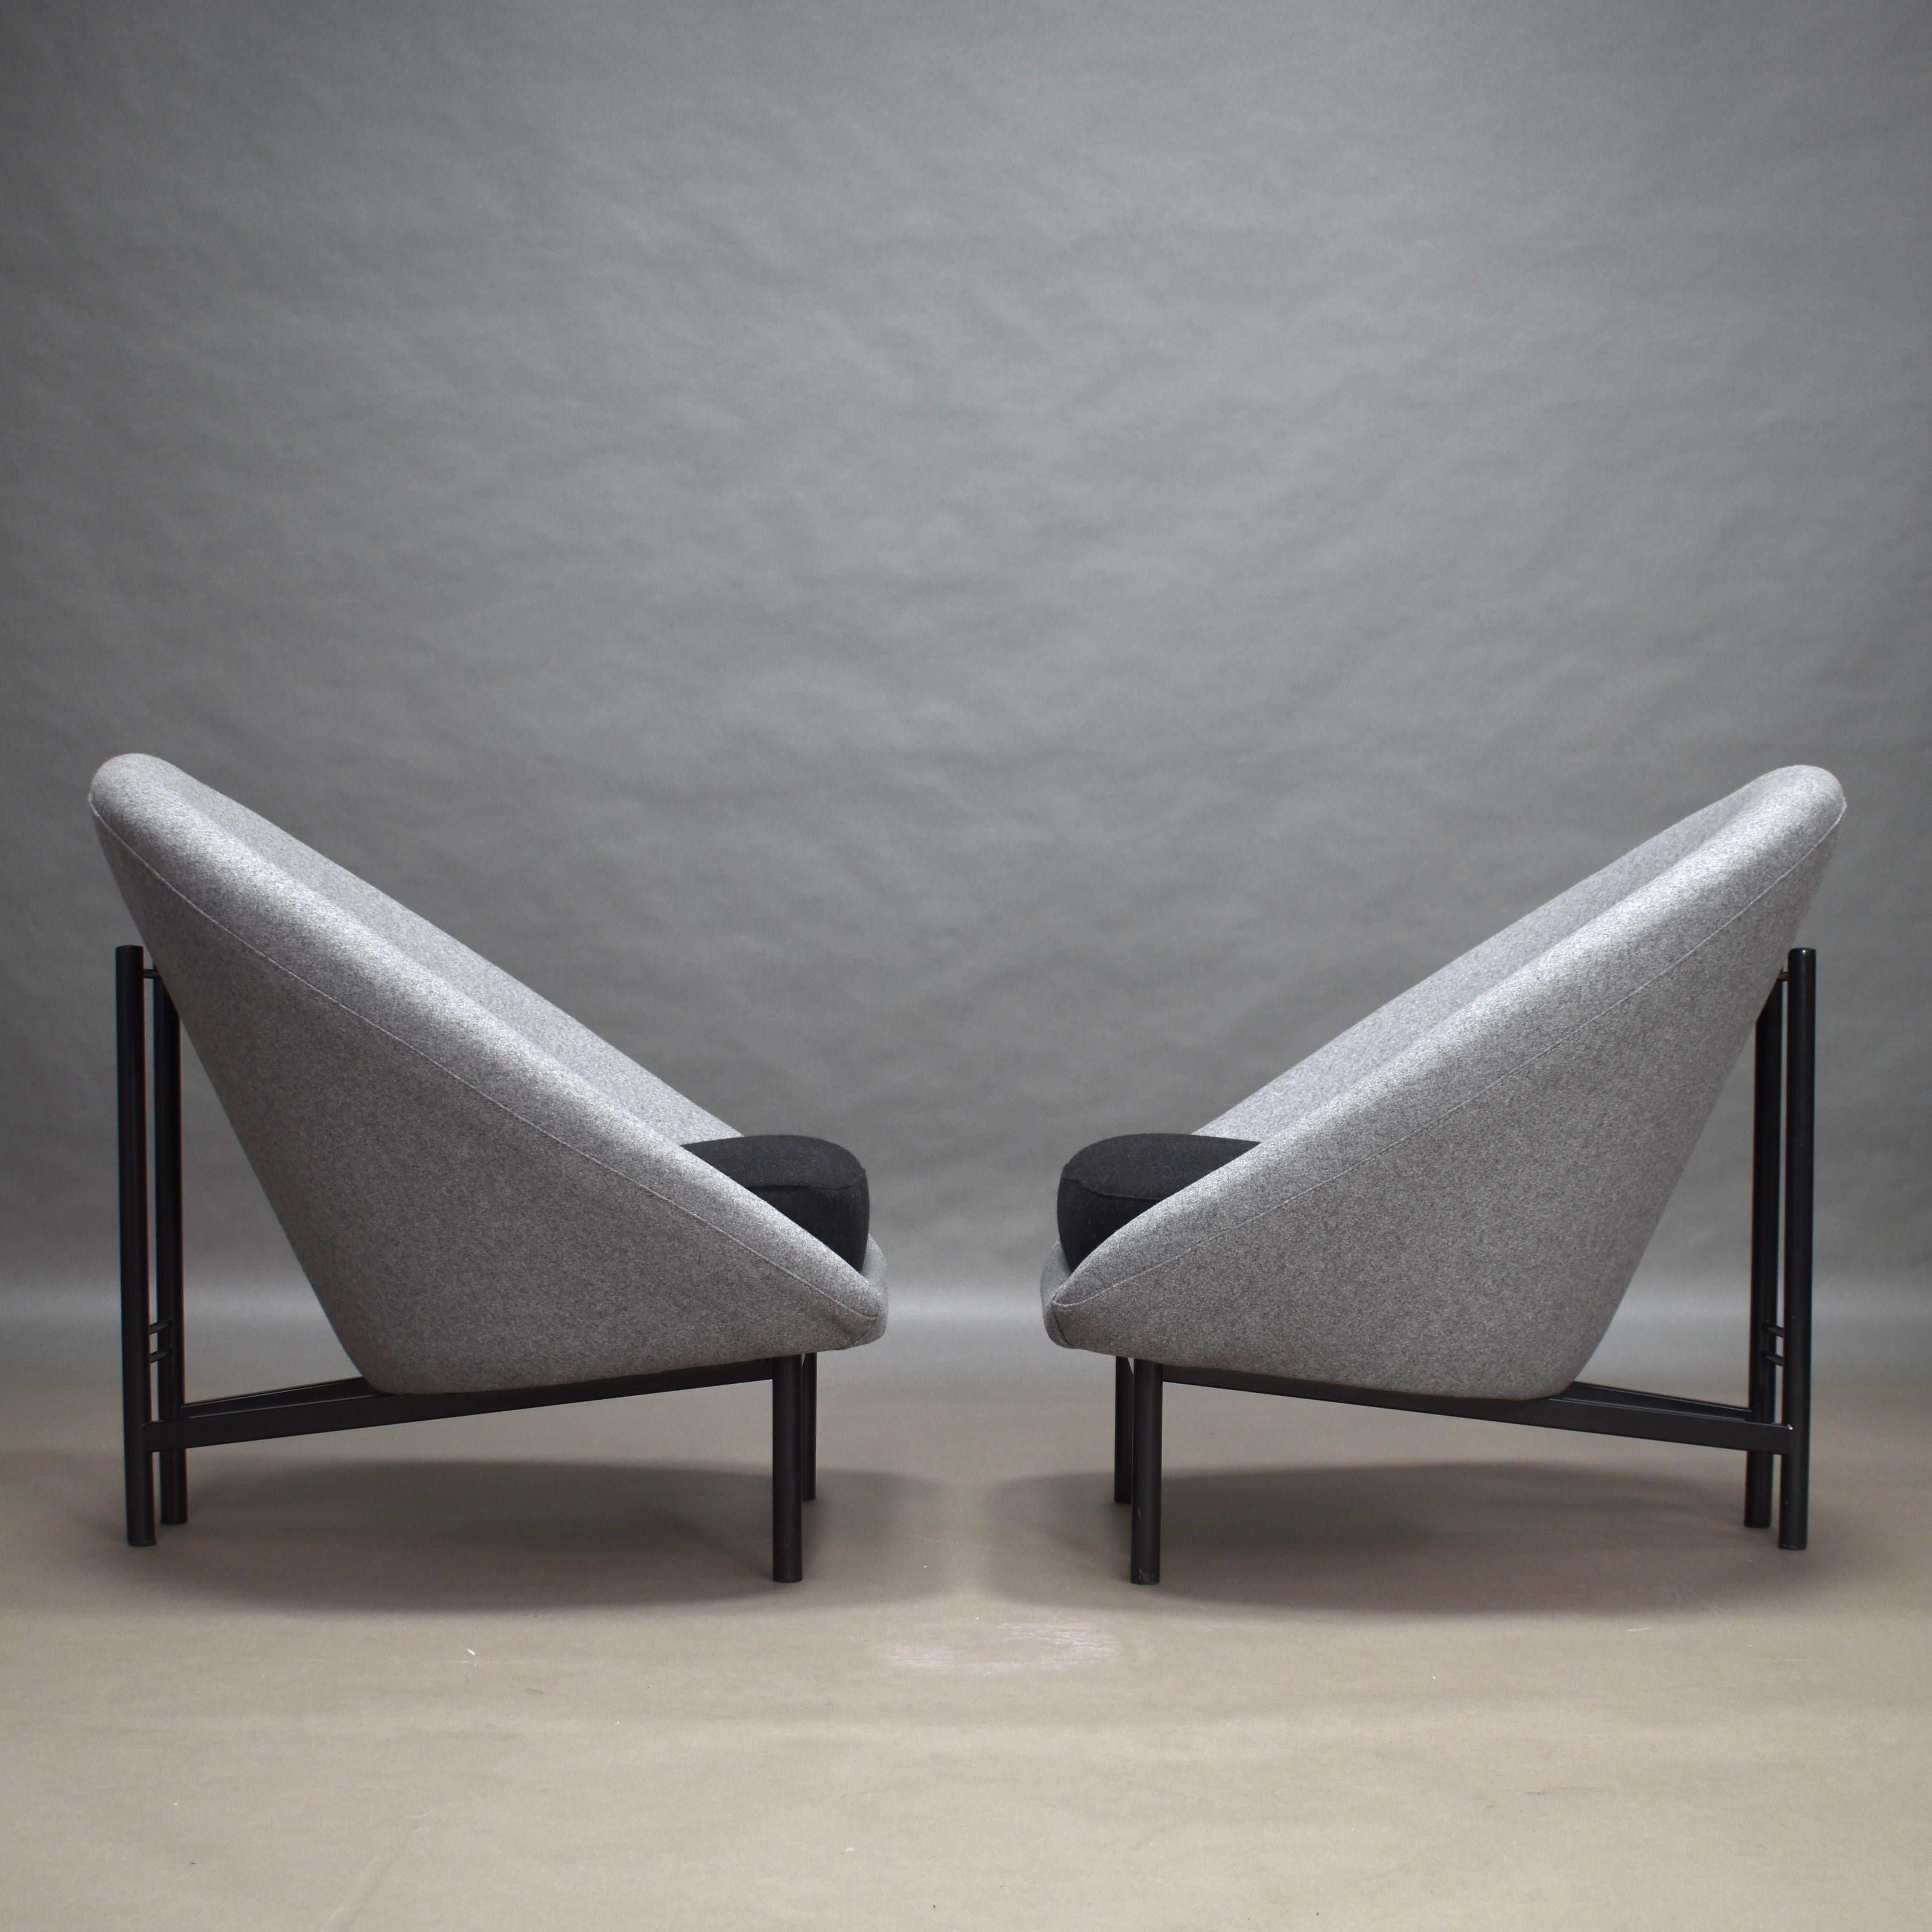 Dutch Theo Ruth F115 Armchairs by Artifort, Netherlands, 1958